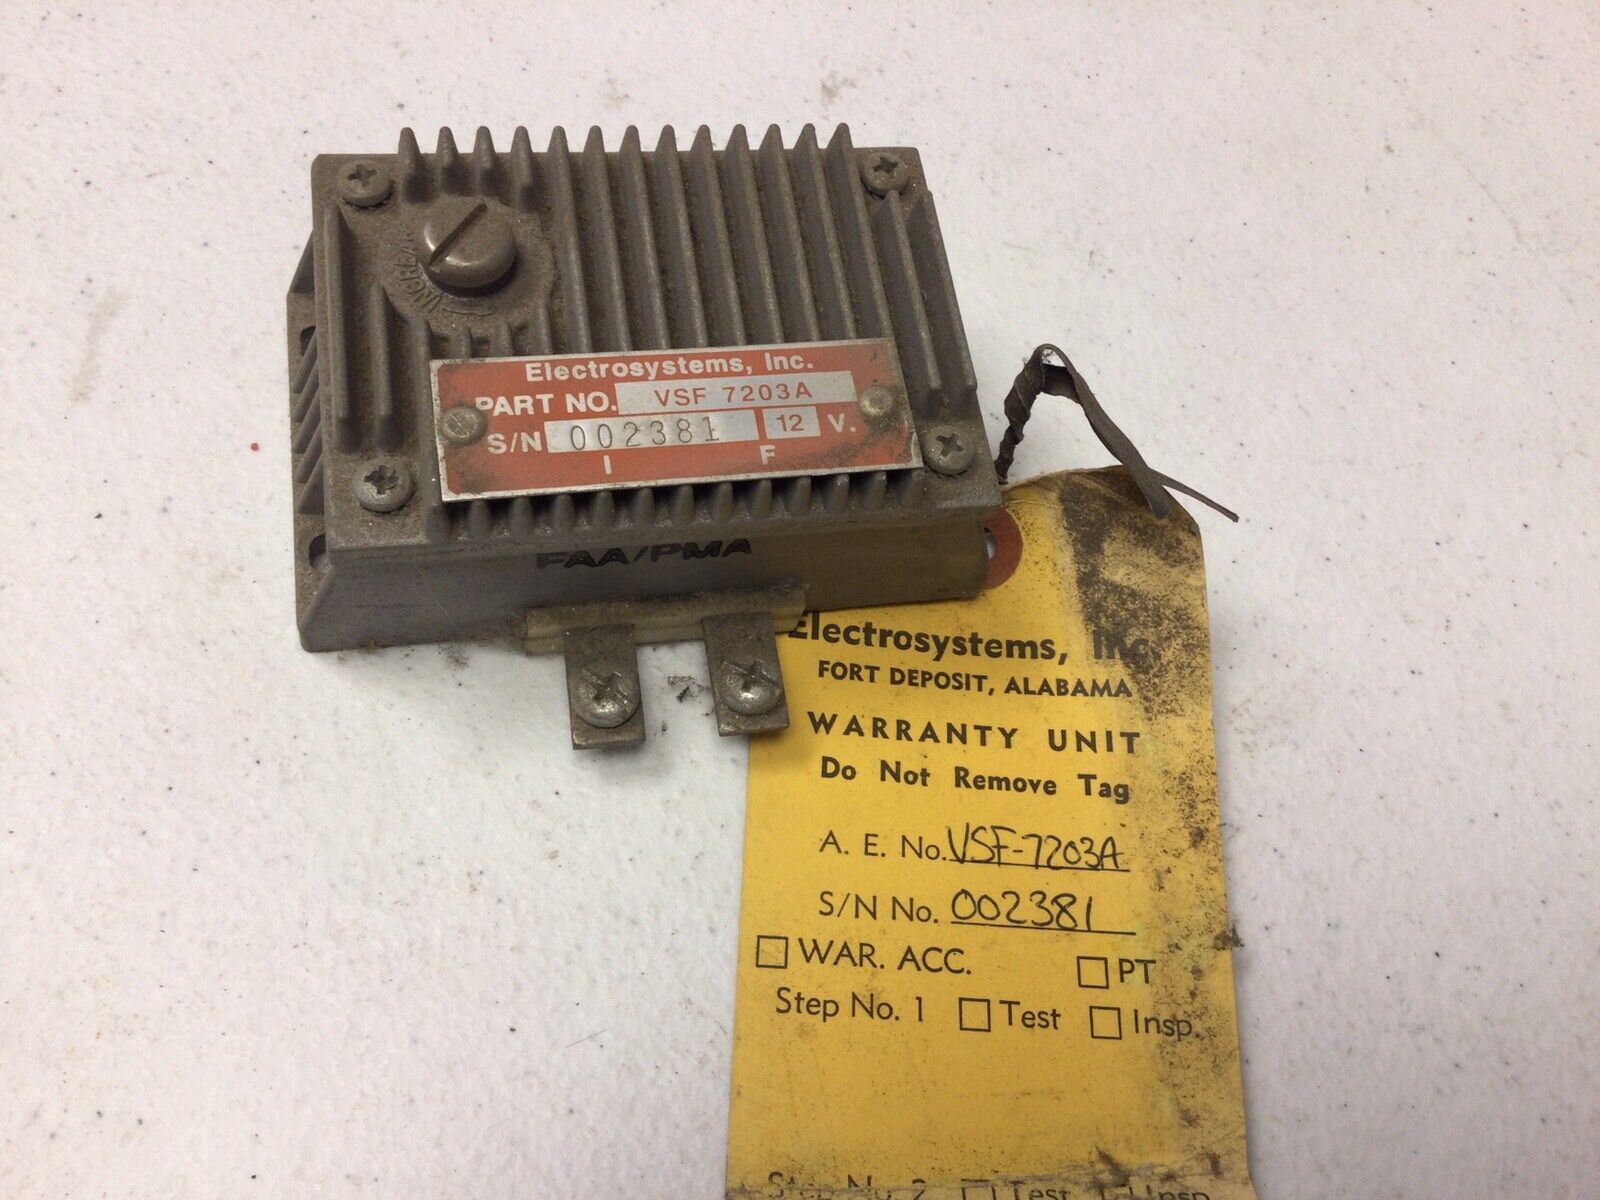 VSF-7203A Electrosystems Voltage Regulator 12 V- USED IN WORKING CONDITION